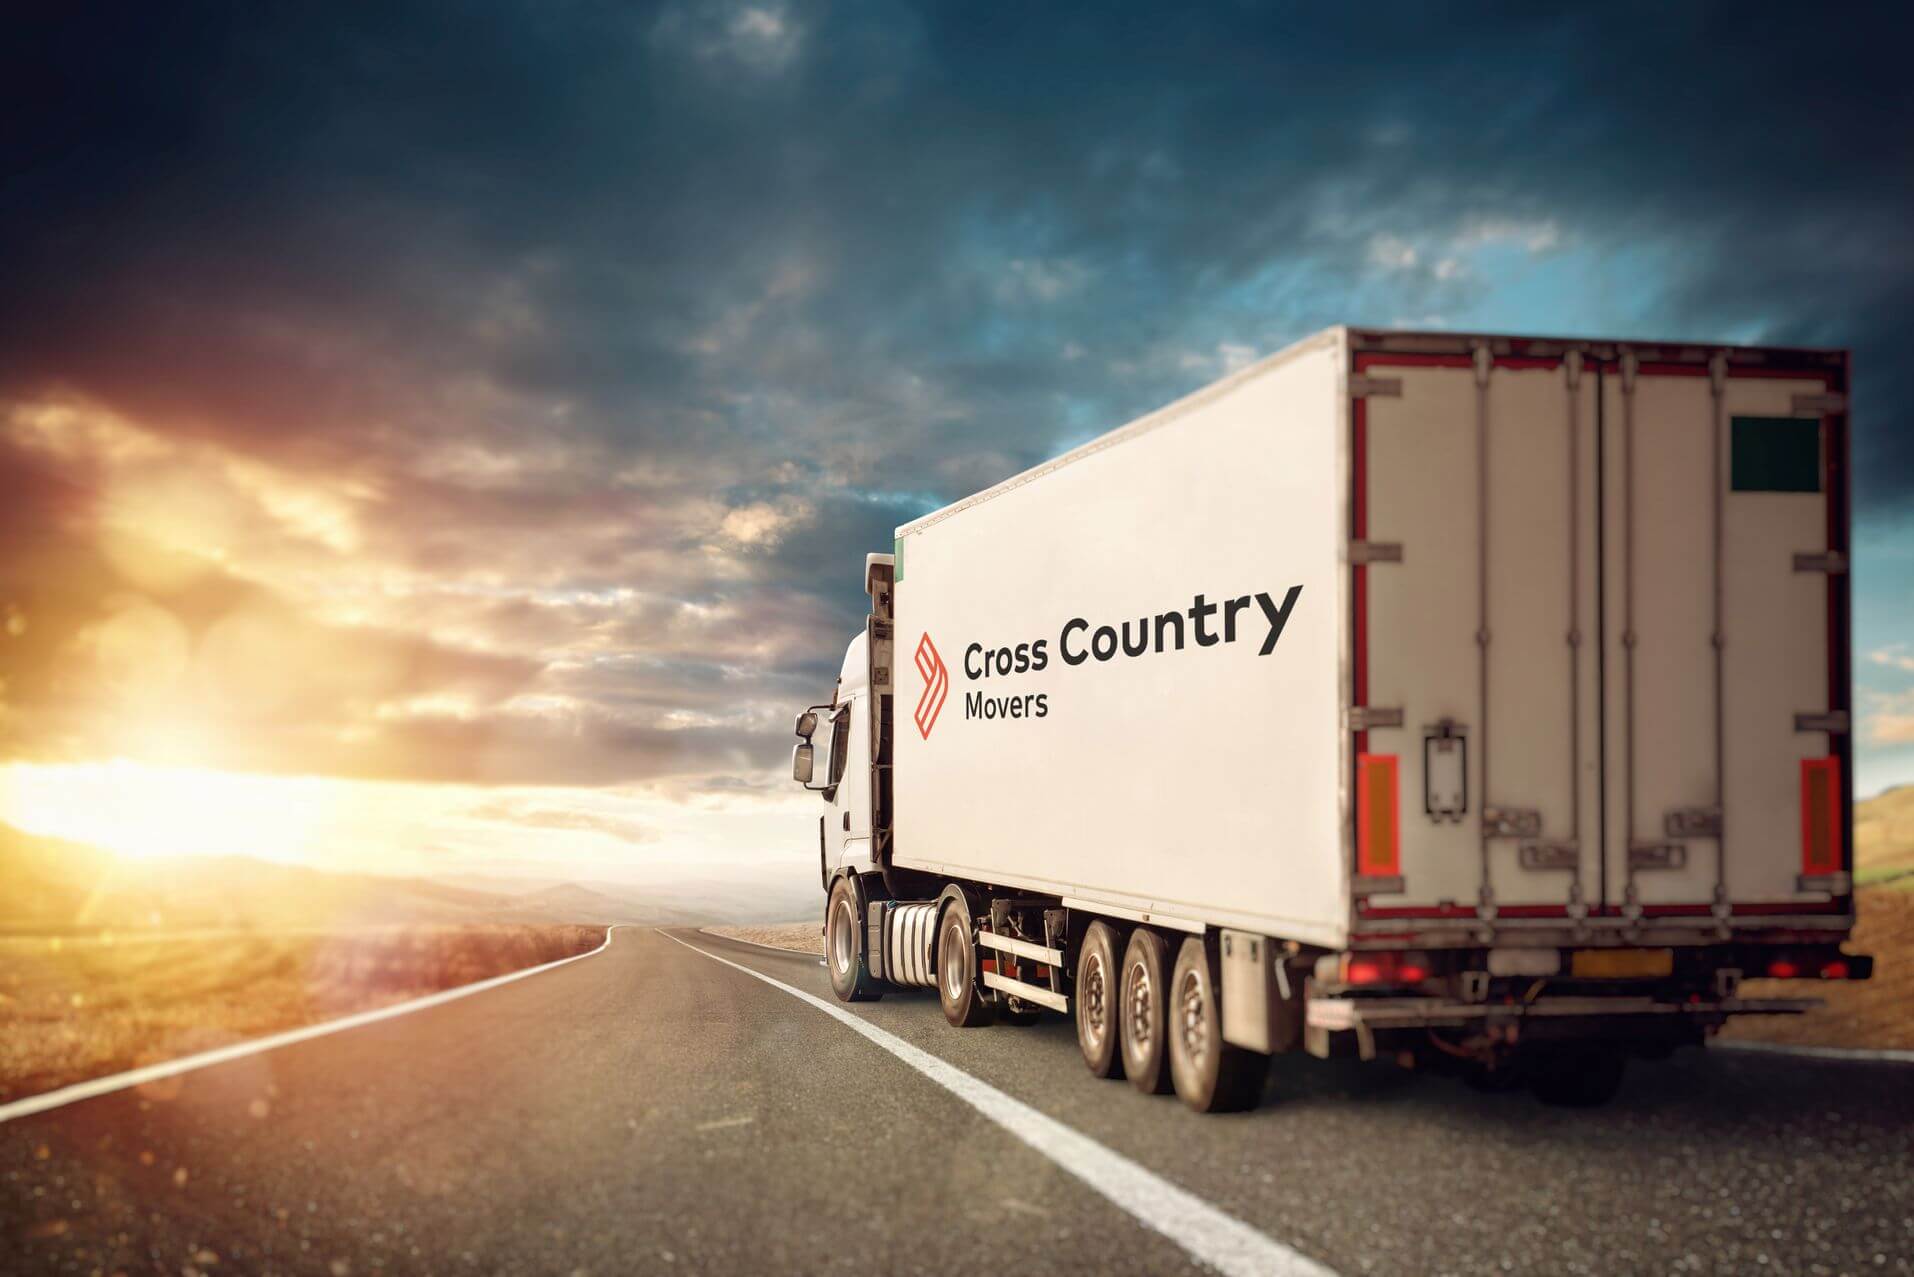 Cross country movers truck